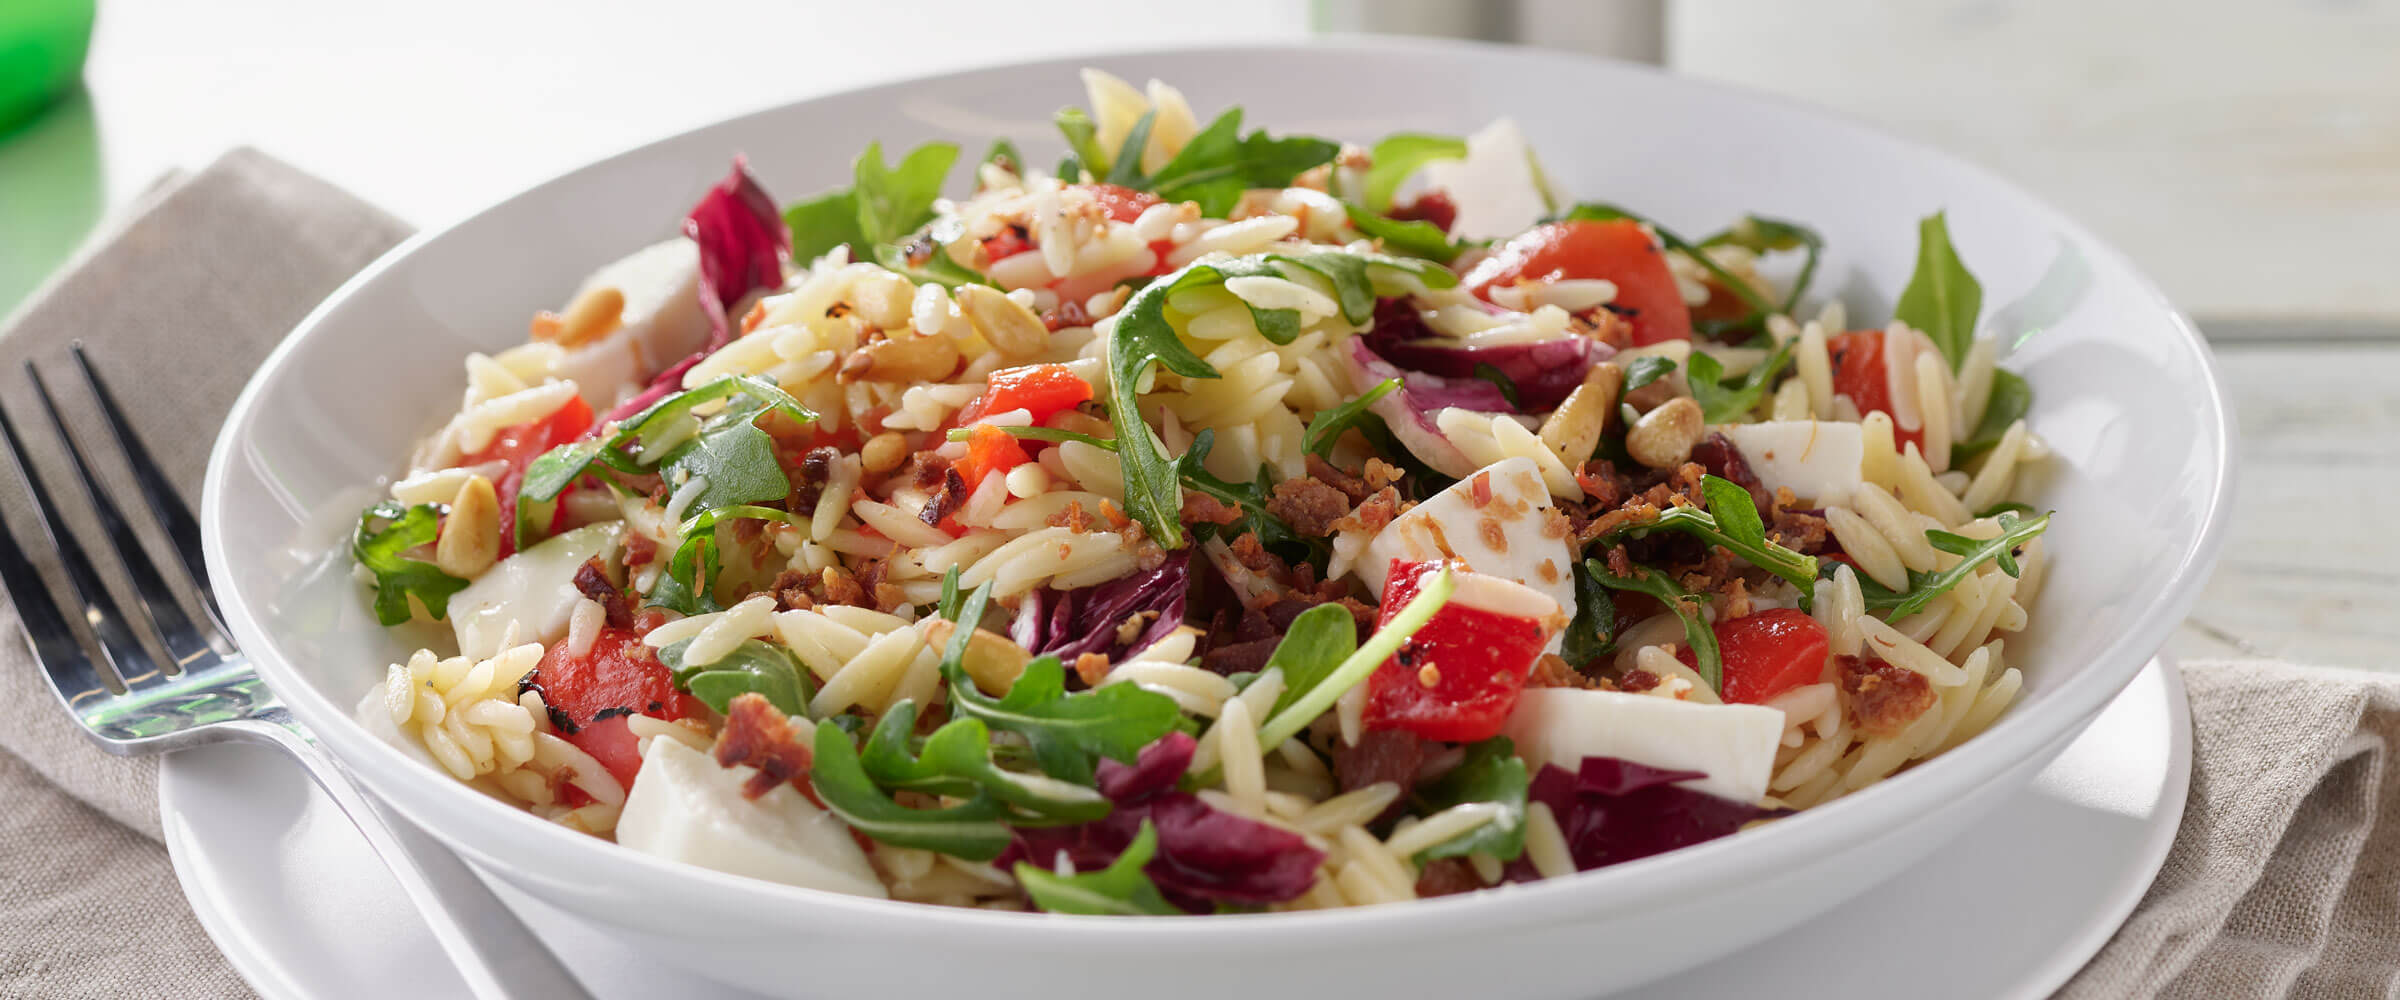 Orzo Salad with garnish in white bowl